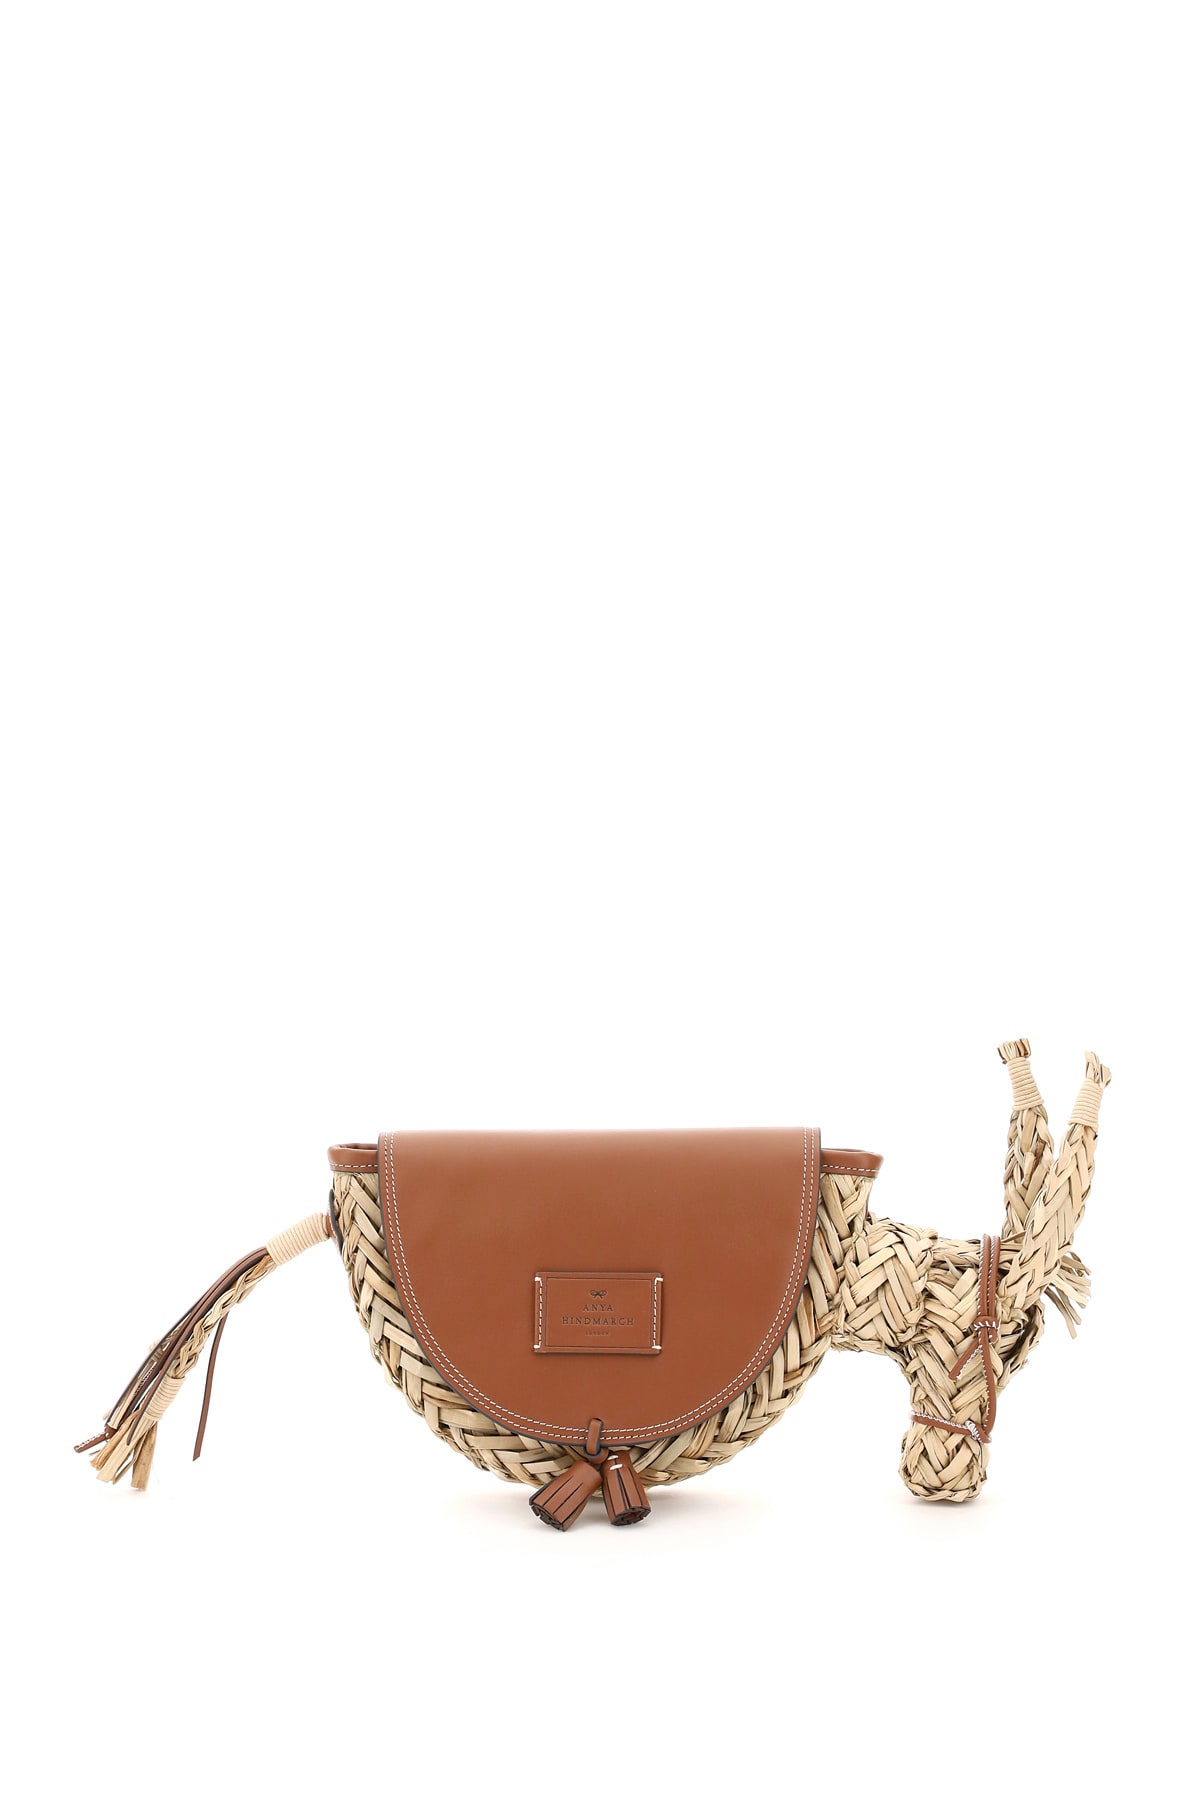 Anya Hindmarch Donkey Clutch In Seagrass And Leather